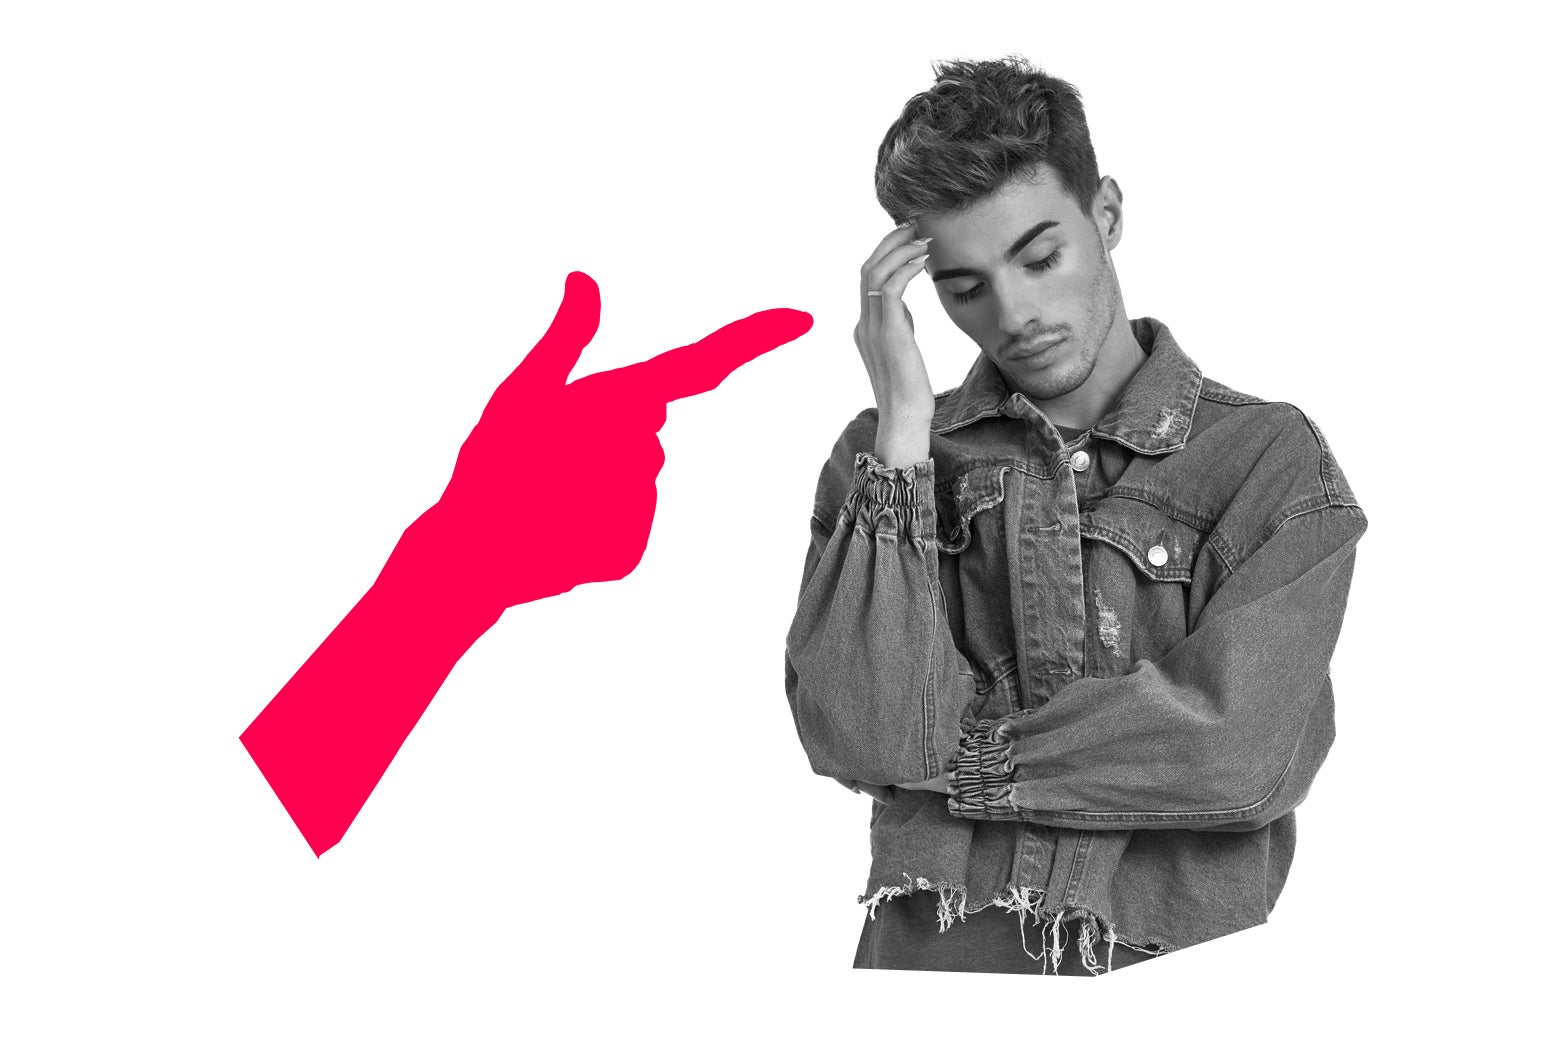 Man in a jean jacket brushing his hair with a hand pointing at him.